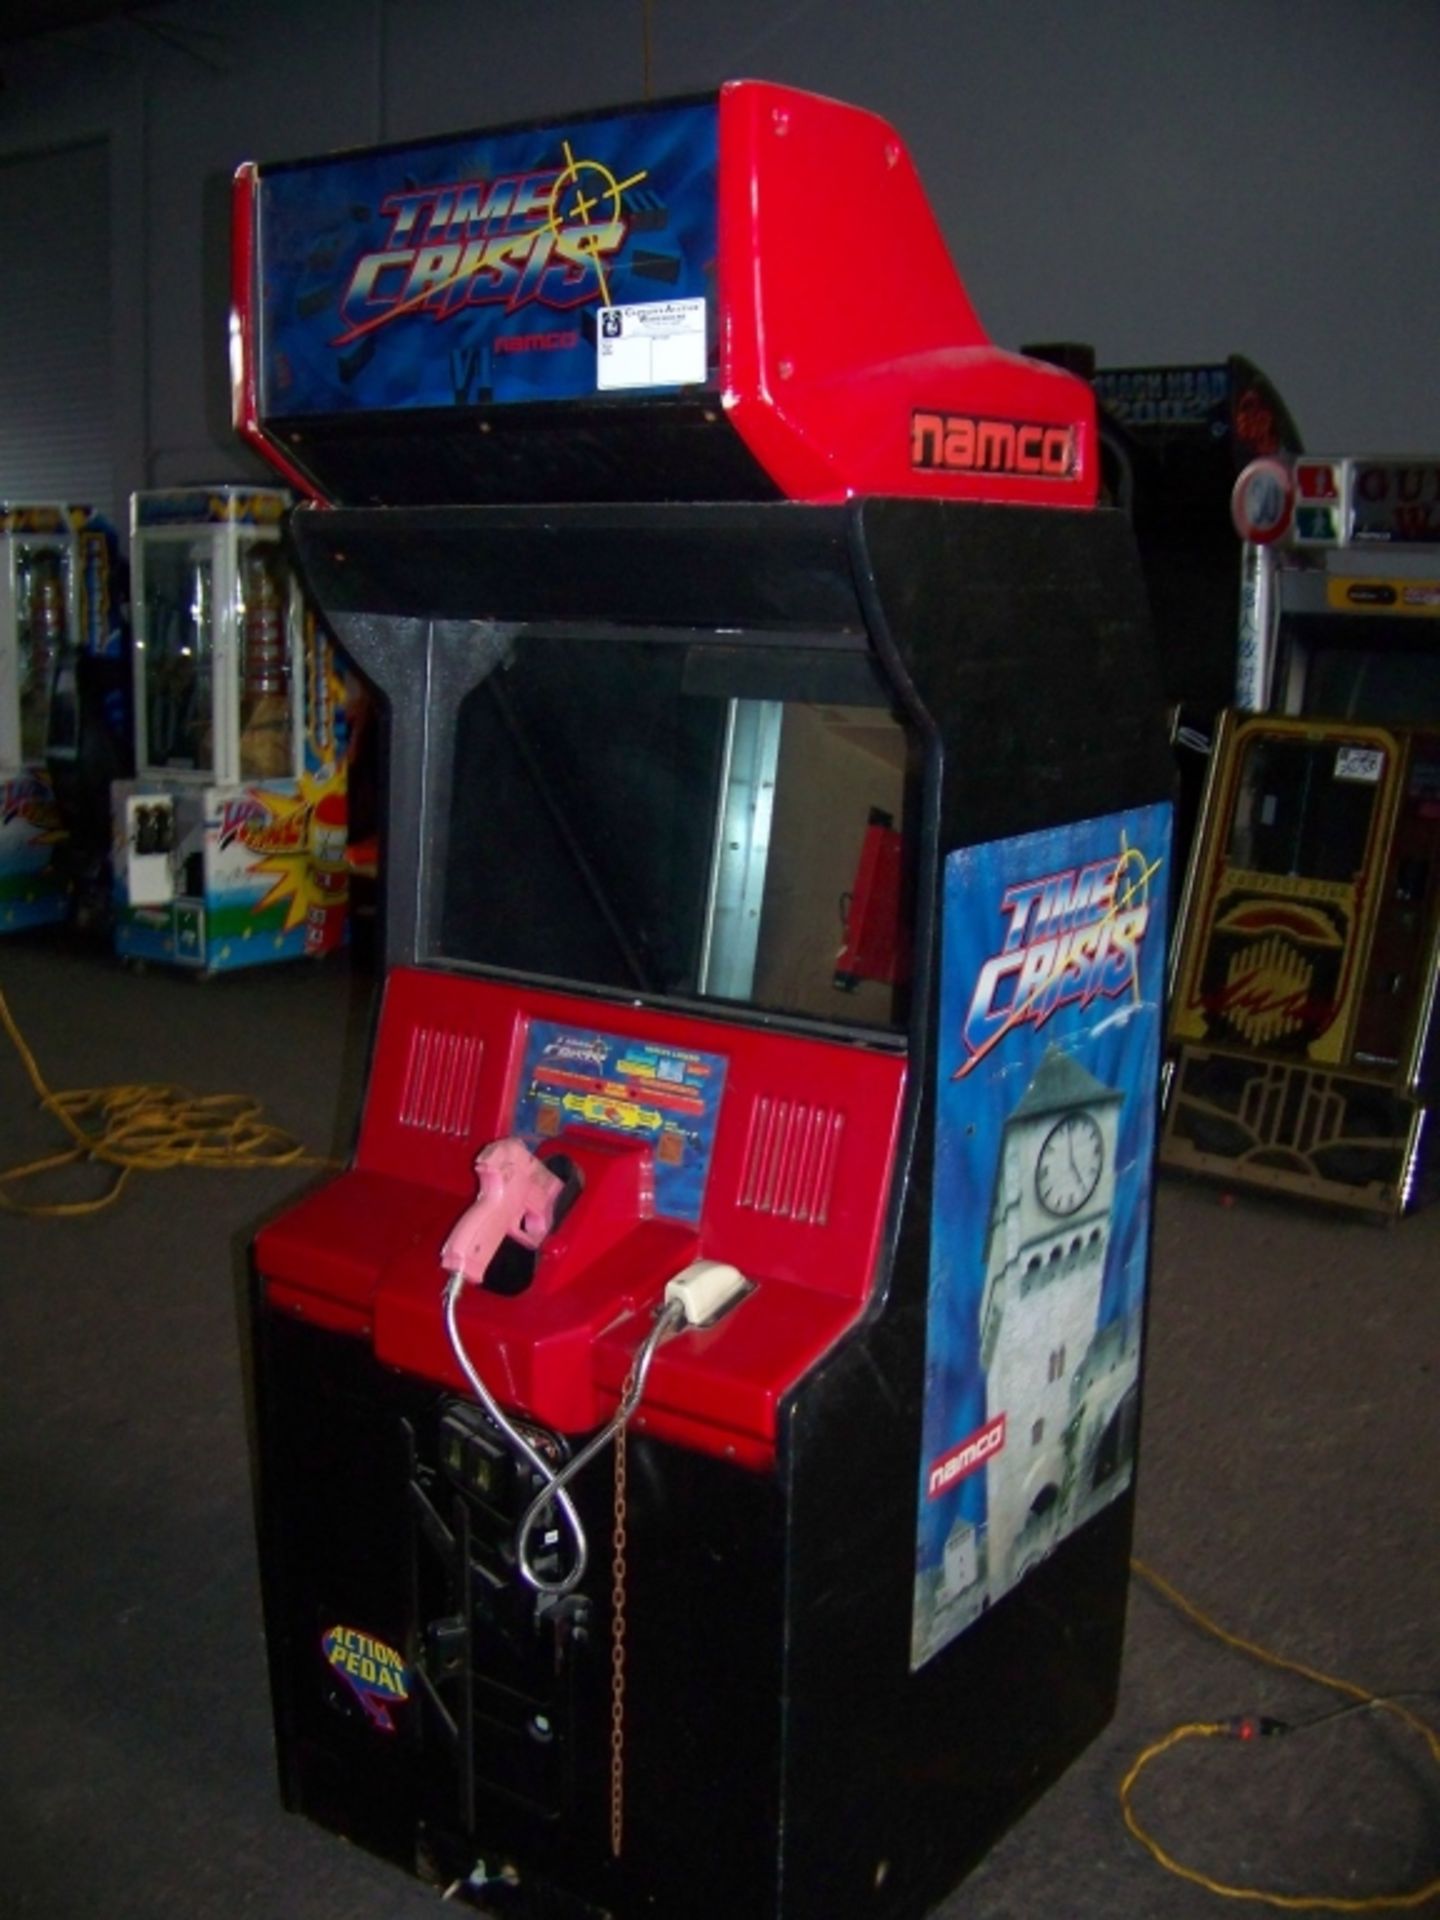 TIME CRISIS SHOOTER ARCADE GAME CABINET NAMCO - Image 3 of 3